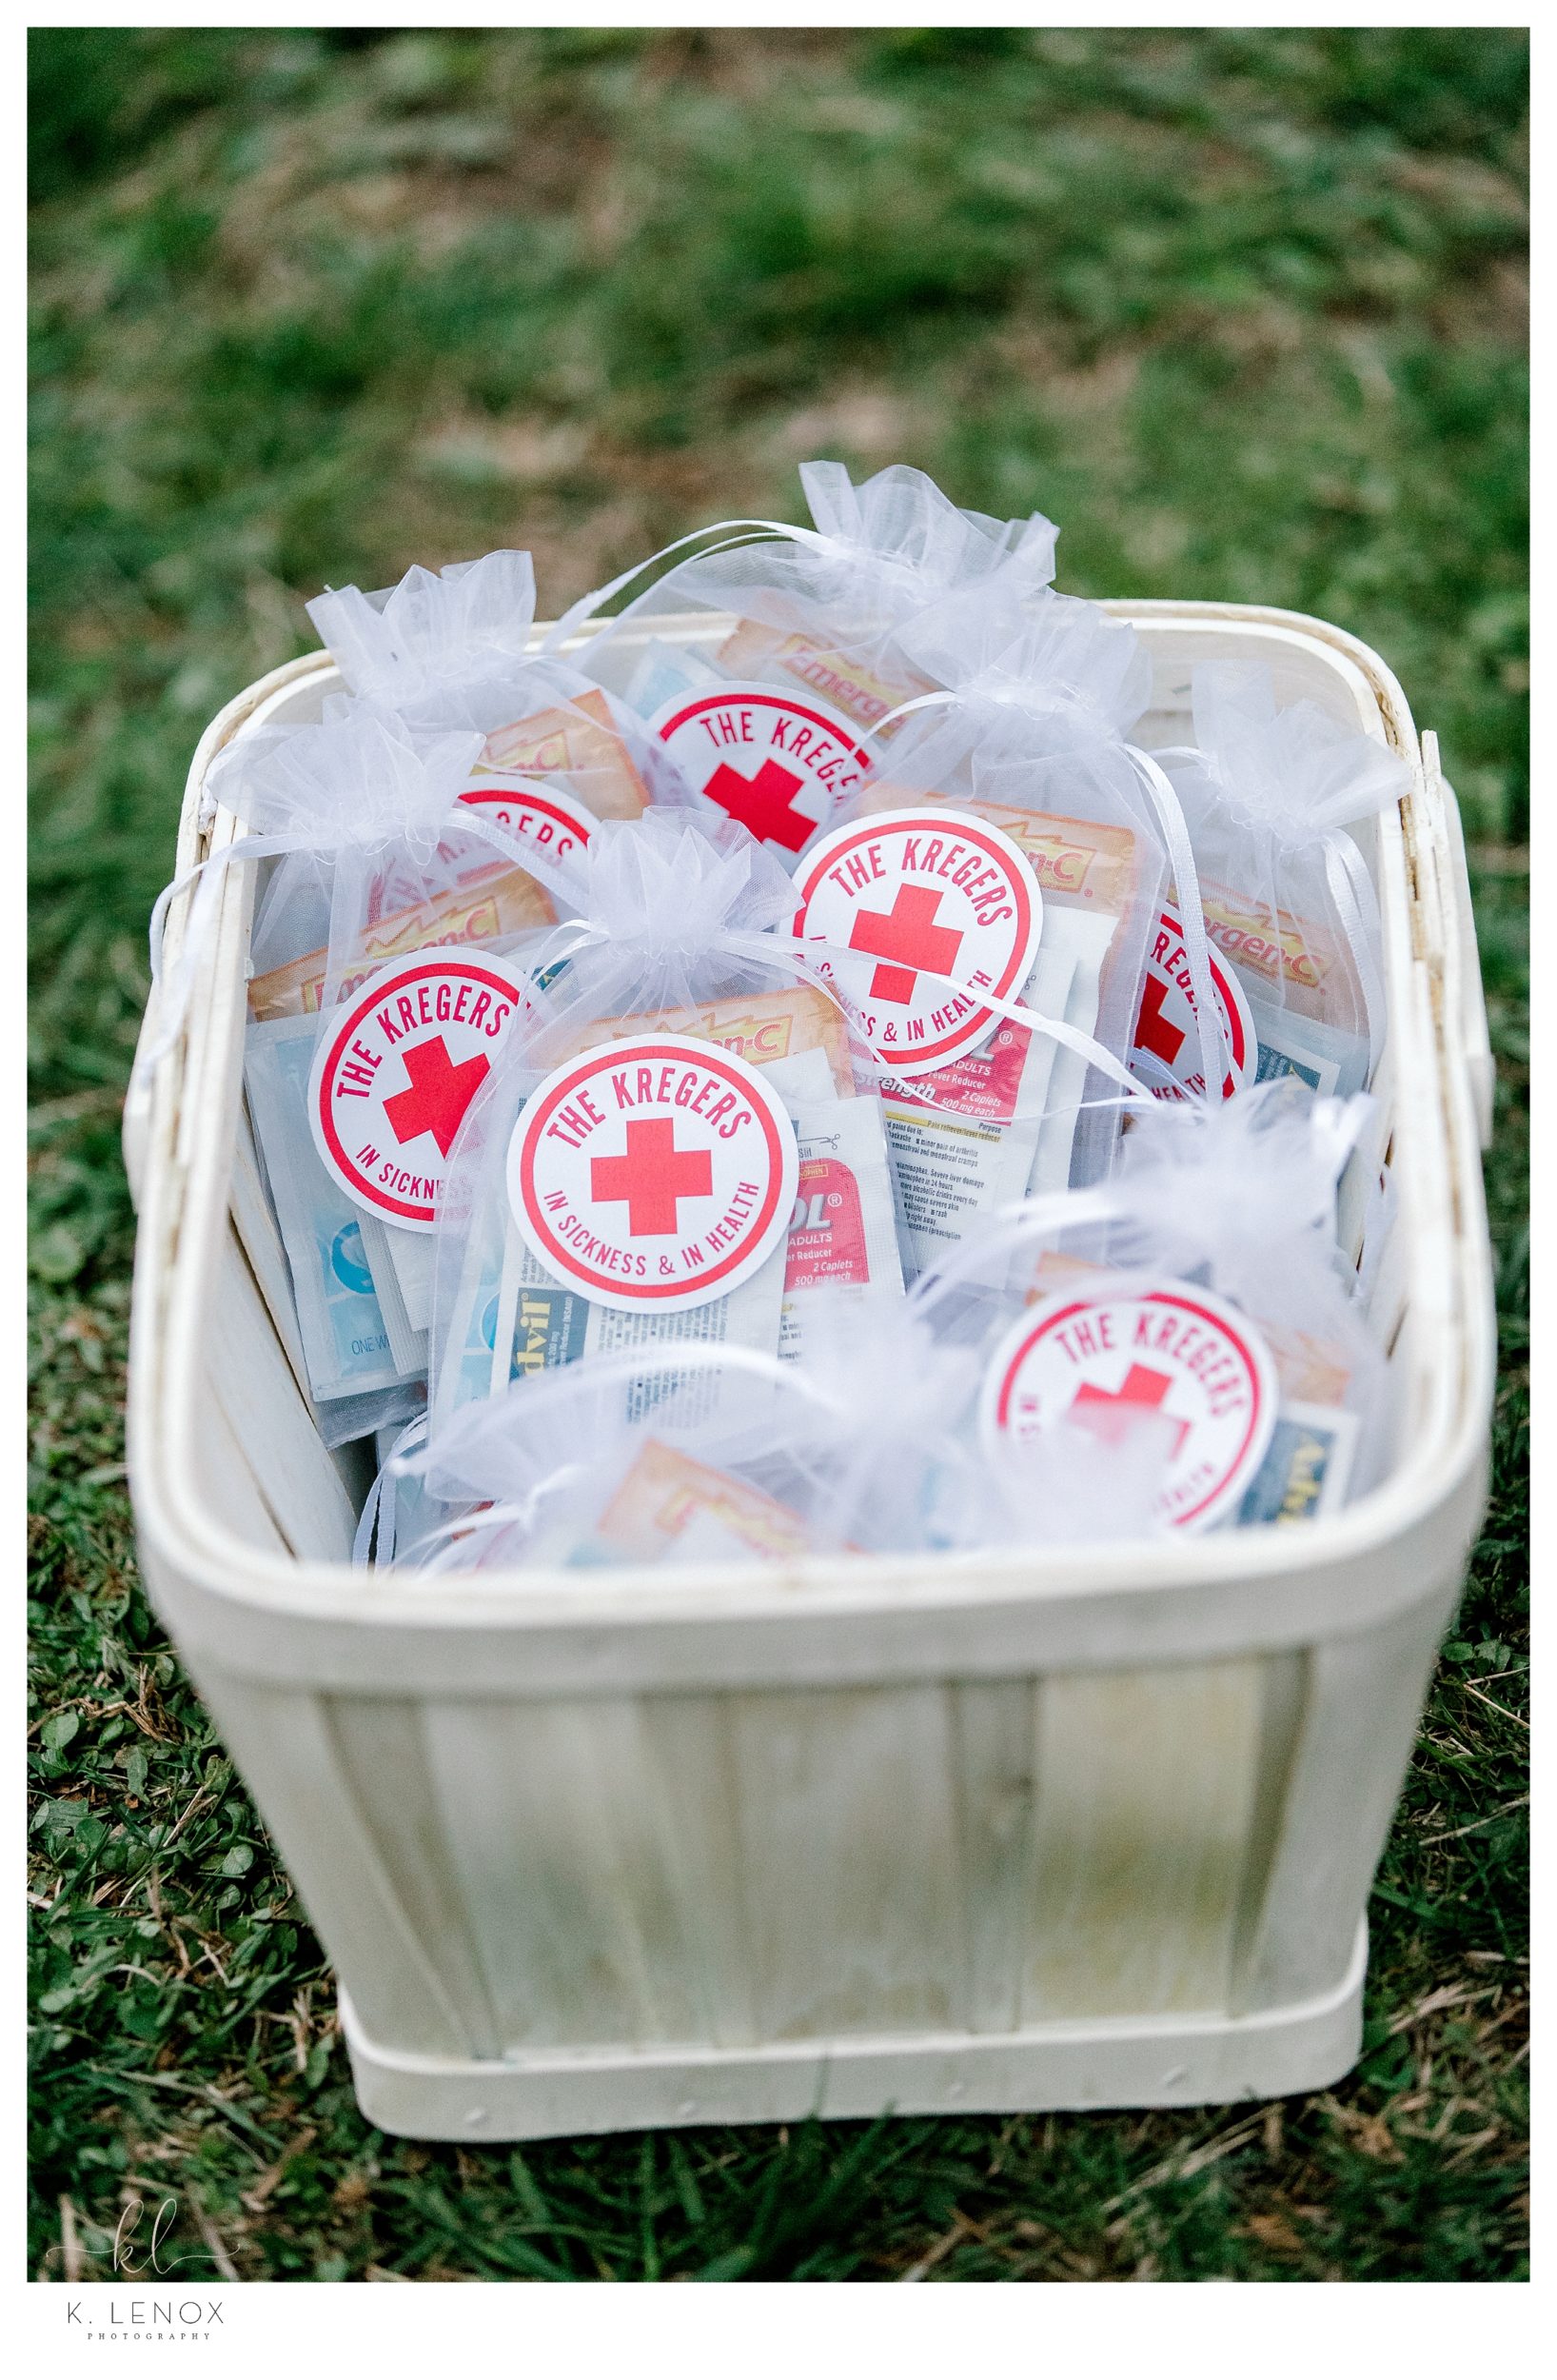 Beautiful Backyard Micro Wedding - related to Covid 19-  Wedding Favors with hand sanitizer and medications. 